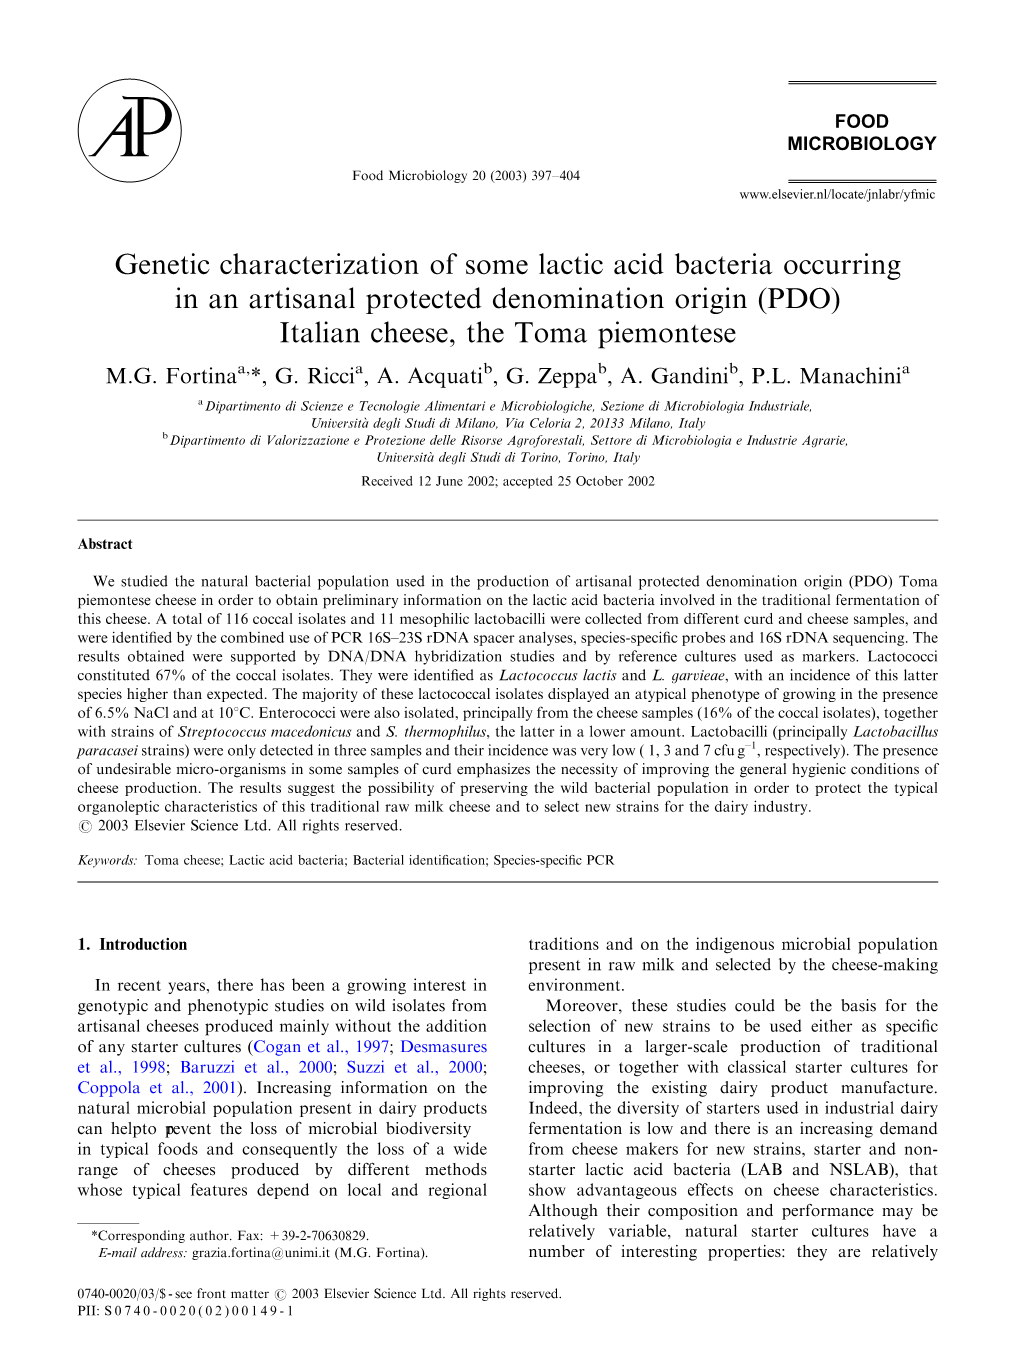 Genetic Characterization of Some Lactic Acid Bacteria Occurring in an Artisanal Protected Denomination Origin (PDO) Italian Cheese, the Toma Piemontese M.G